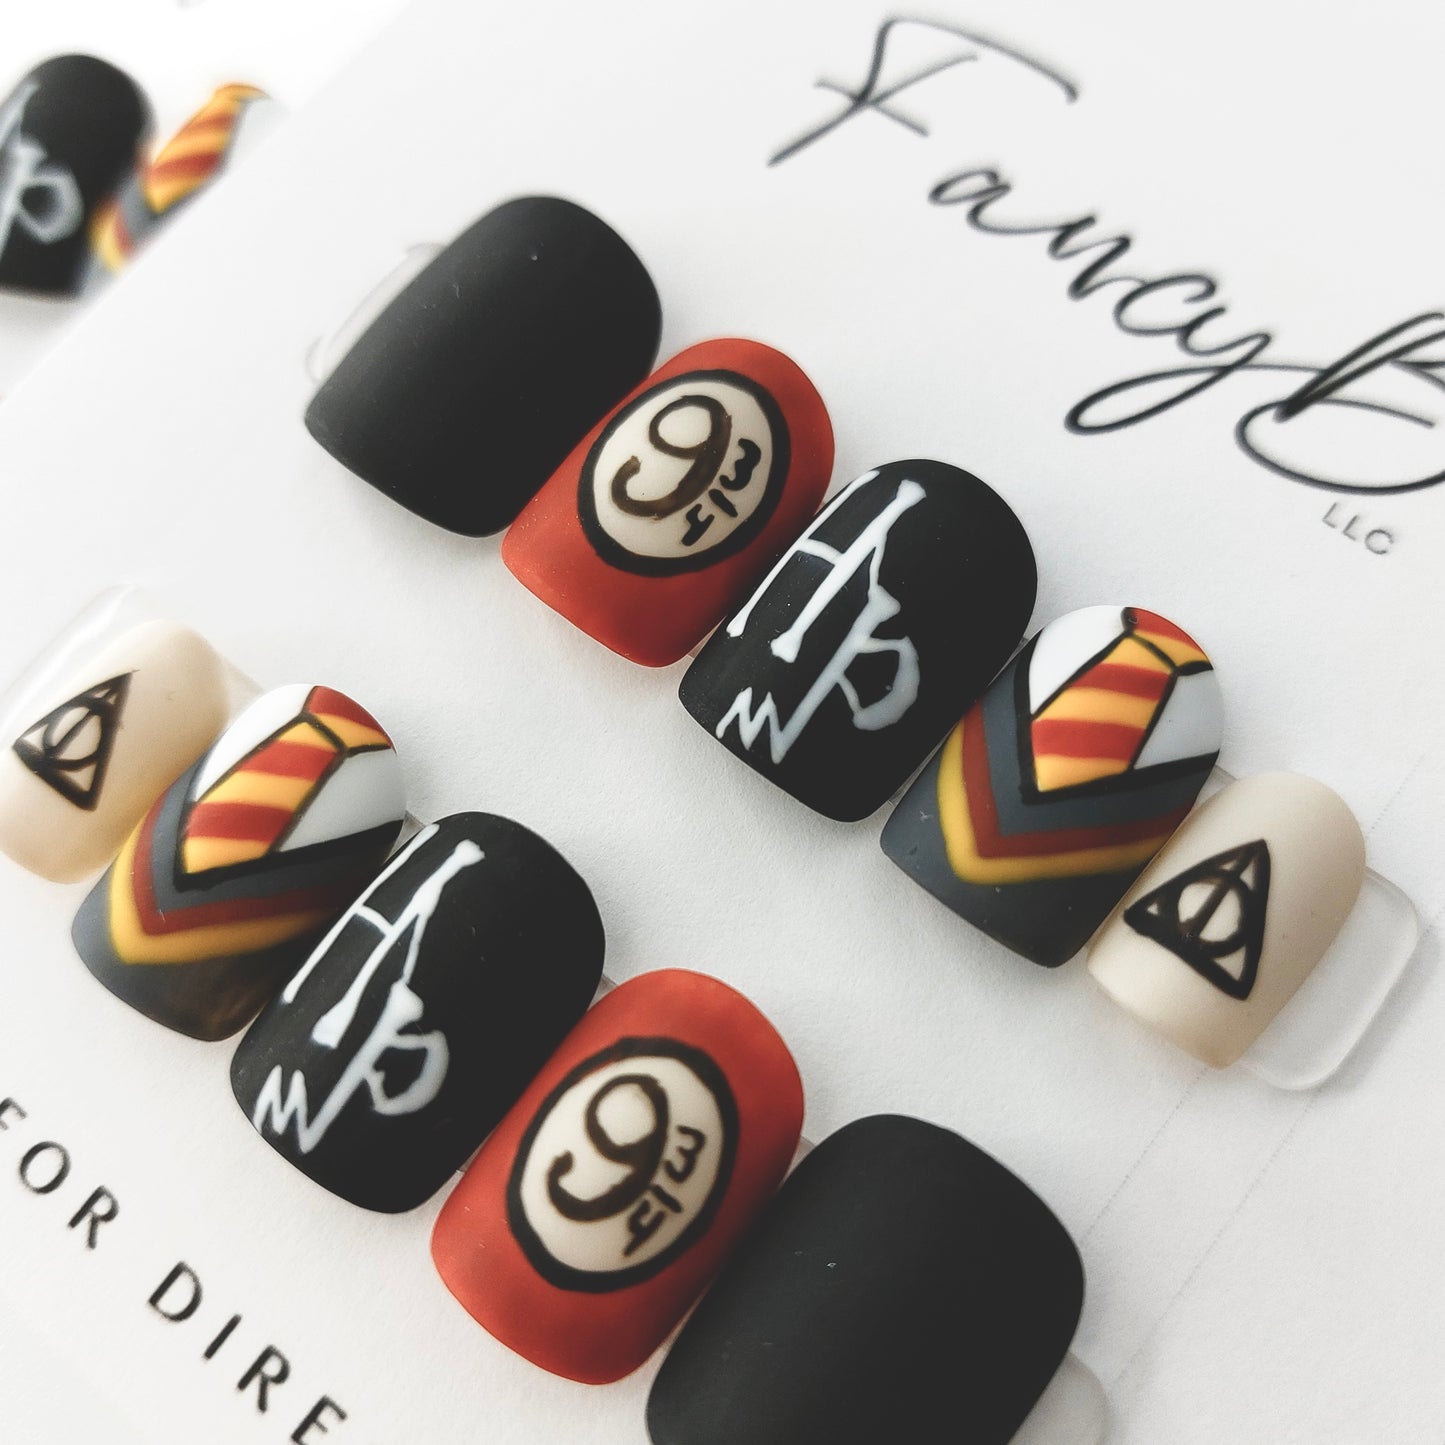 Custom press on nails. Harry Potter theme press on nails in matte finish on short squoval shape. reusable handmade stick on nails.